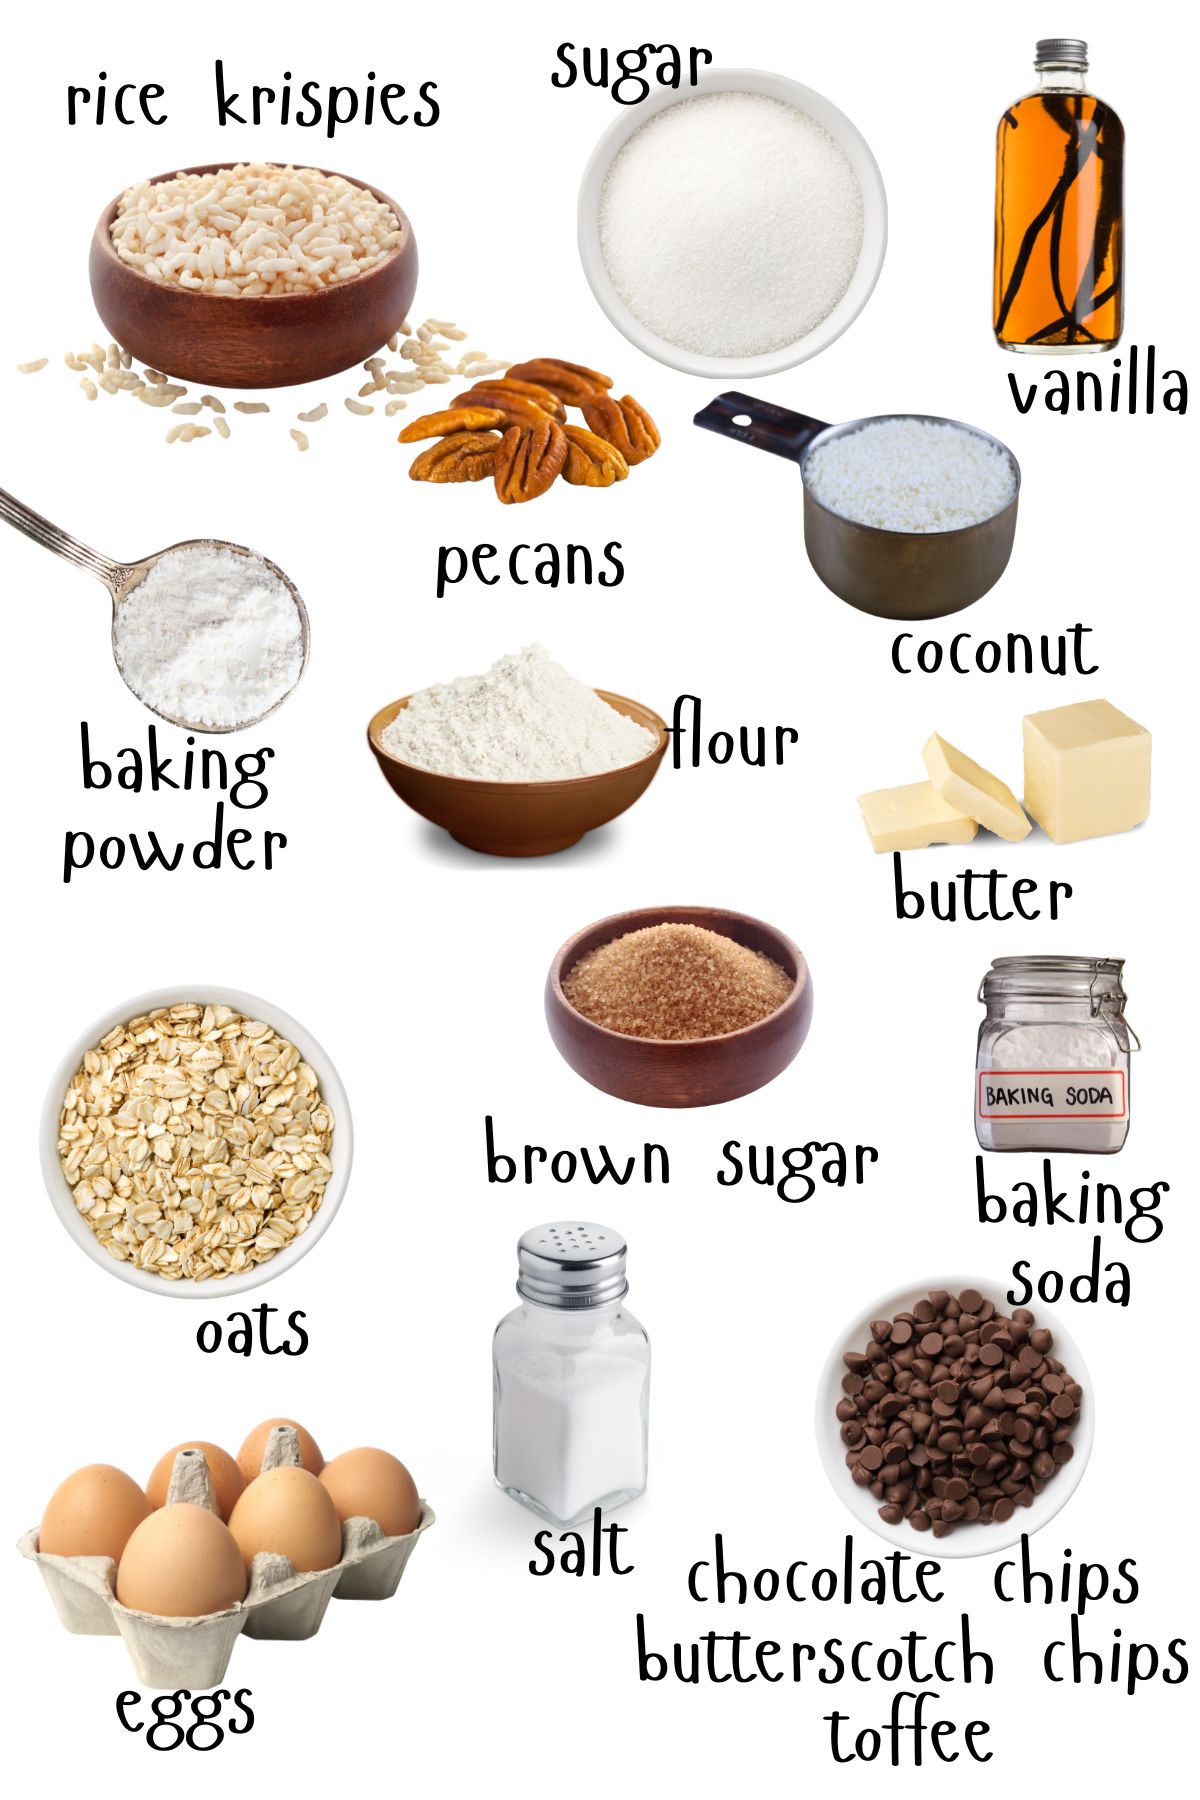 Labled ingredients for Ranger Cookies on a white background.